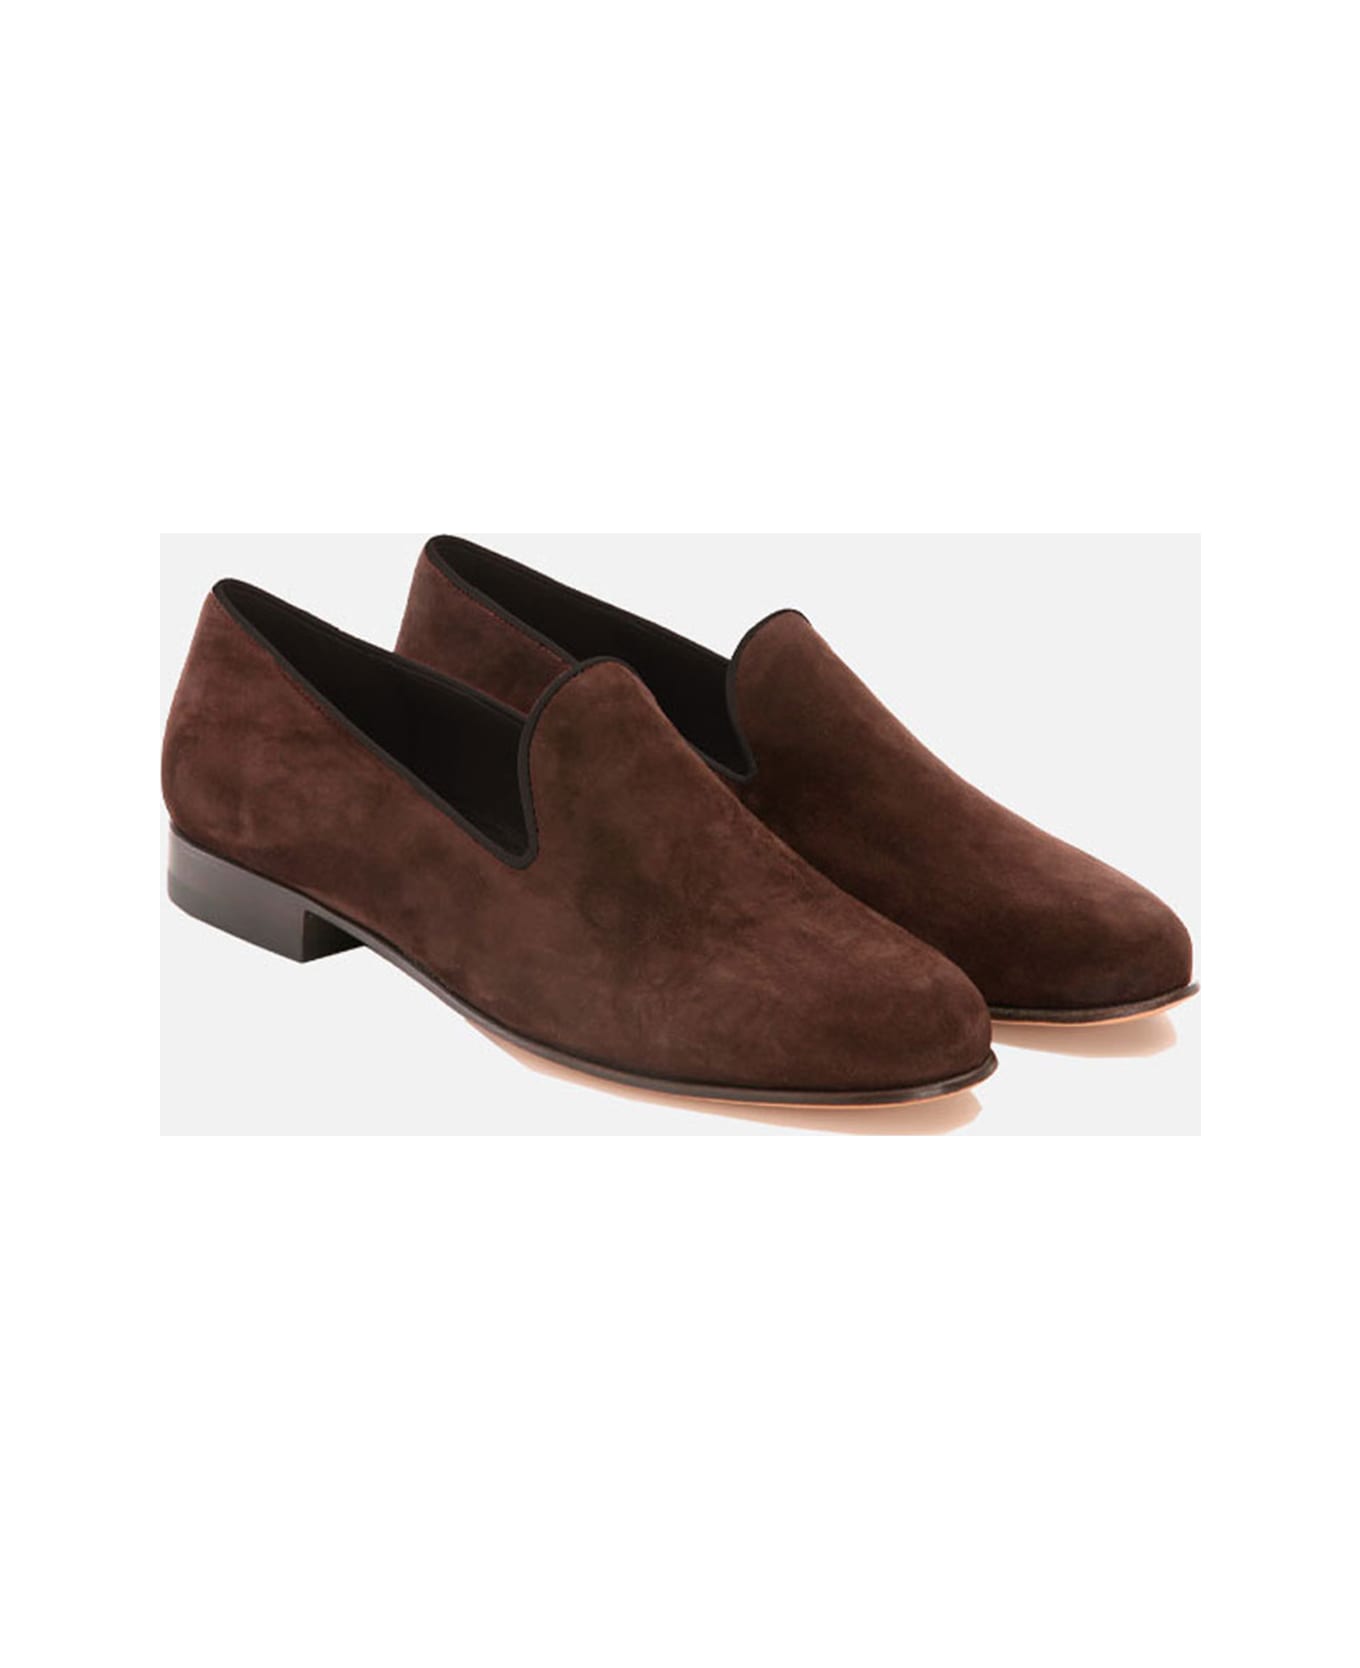 CB Made in Italy Suede Flats Positano - Brown フラットシューズ